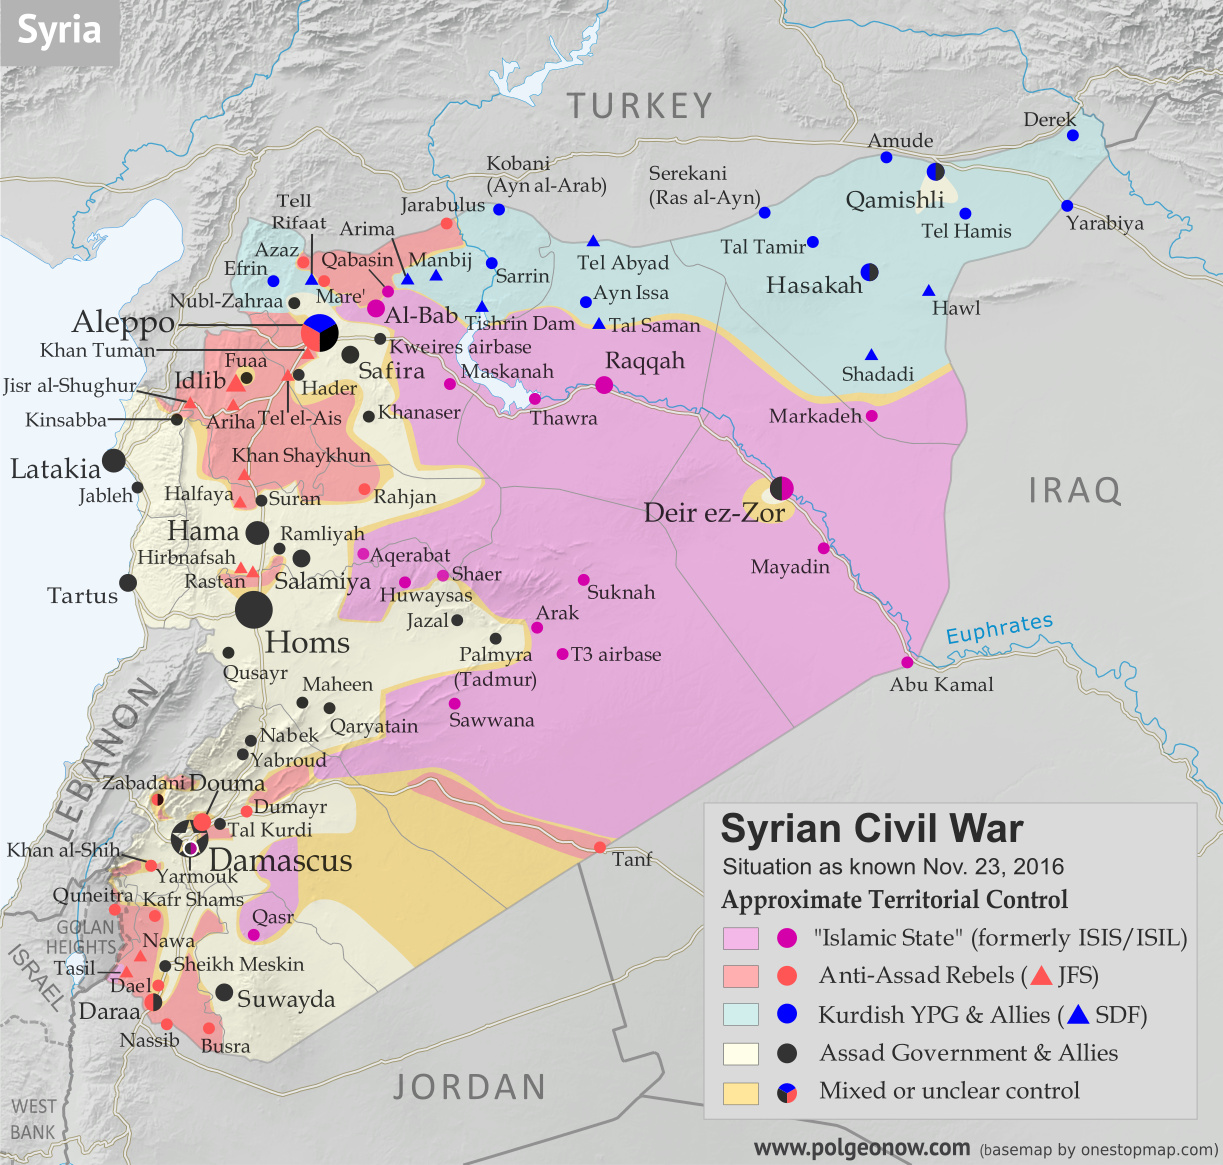 Map of fighting and territorial control in Syria's Civil War (Free Syrian Army rebels, Kurdish YPG, Syrian Democratic Forces (SDF), Jabhat Fateh al-Sham (Al-Nusra Front), Islamic State (ISIS/ISIL), and others), updated to November 23, 2016. Now includes terrain and major roads (highways). Includes recent locations of conflict and territorial control changes, such as Al-Bab, Khan al-Shih, Tal Saman, Qabasin, and more. Colorblind accessible.